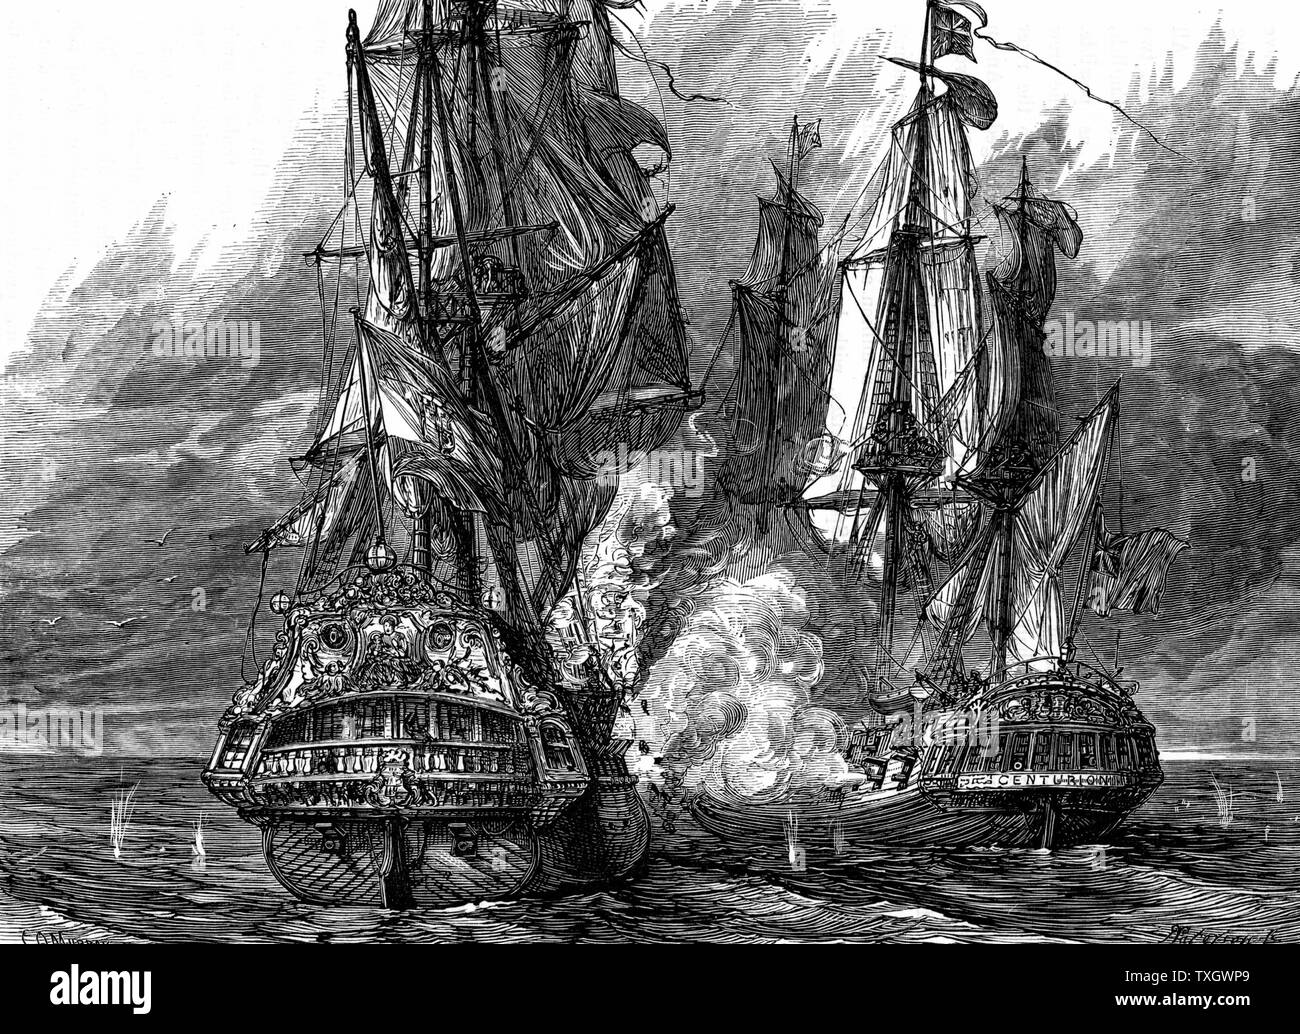 Admiral George Anson (1697-1762) English naval commander, in the 'Centurion' (right) taking the Spanish galleon 'Nostra Signora de Cabadonga' off the Philippines. War of Jenkins' Ear 1739-48. Woodcut c.1895 Stock Photo